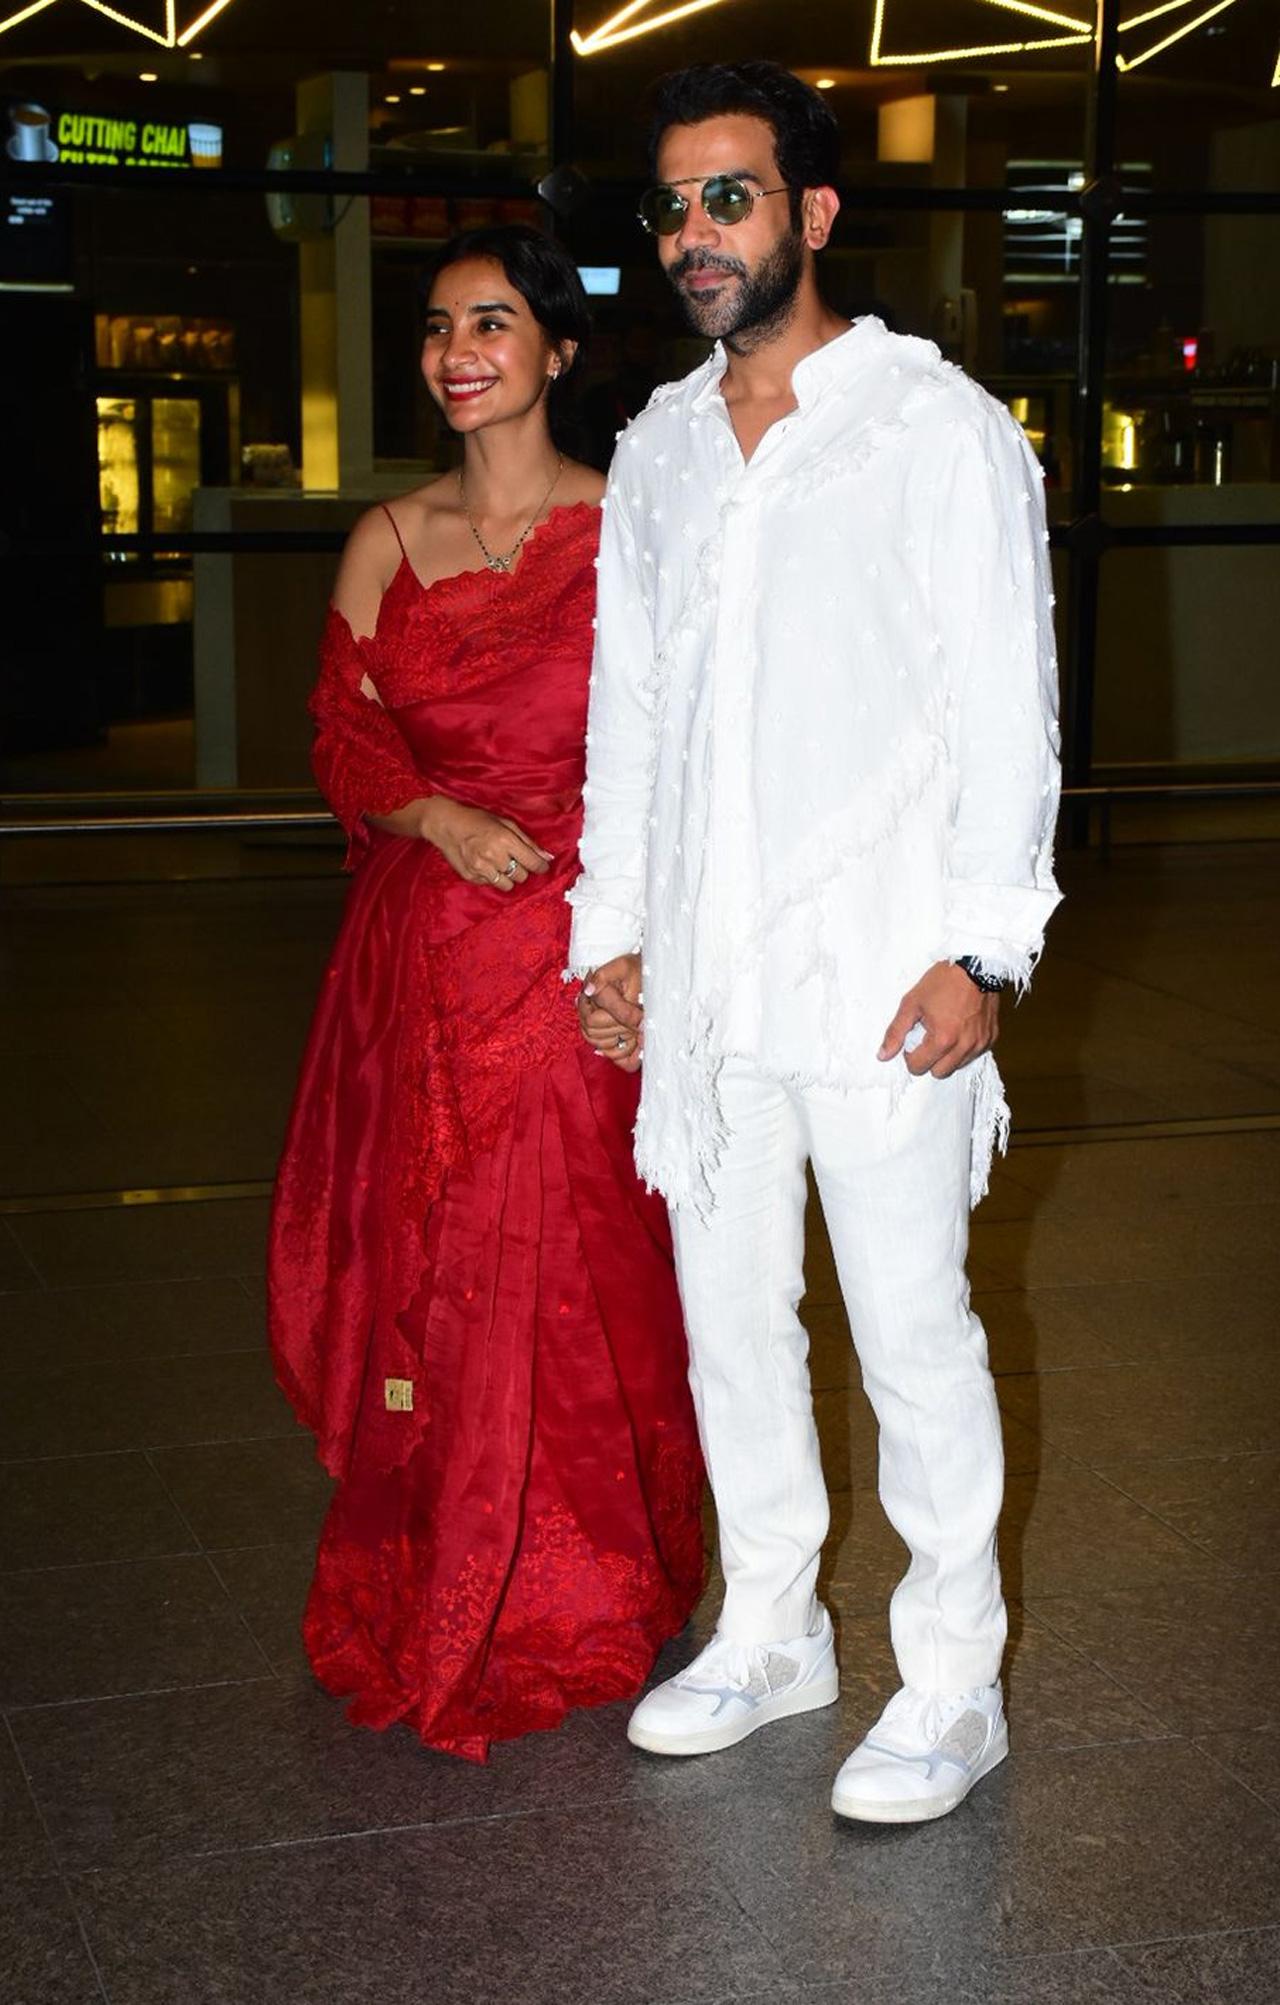 They both wore ace designer Sabyasachi’s outfit and looked dreamy at their wedding. Patralekhaa, being a Bengali, chose to go with a fusion-Bengali bride look featuring an alluring red lehenga and ornate gold jewelry to complete her attire. Rajkummar Rao donned a cream-coloured Sherwani. 